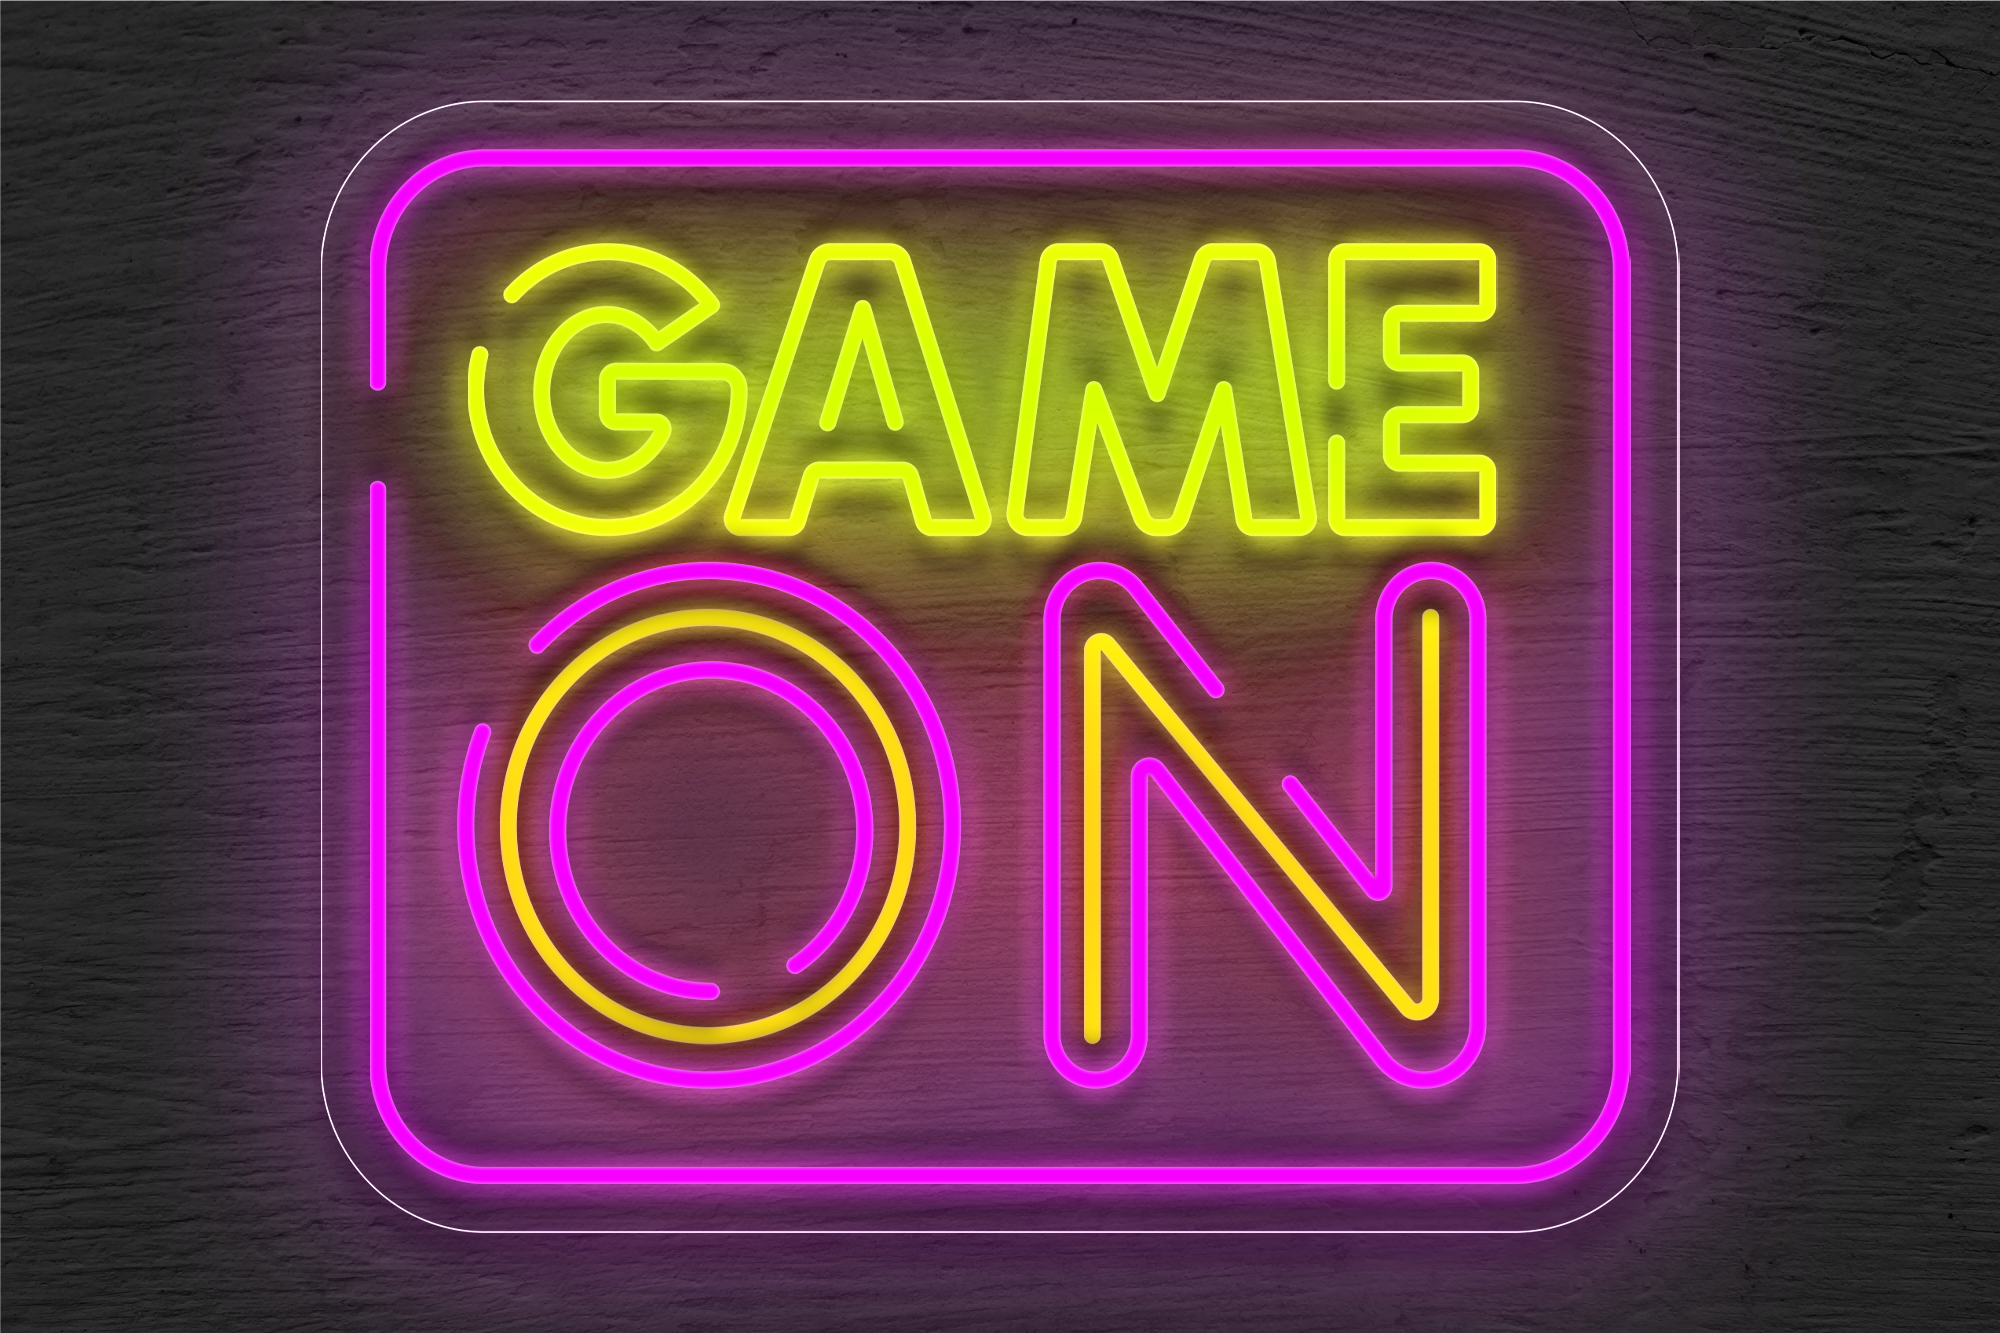 Outline Text "Game On" with Border LED Neon Sign